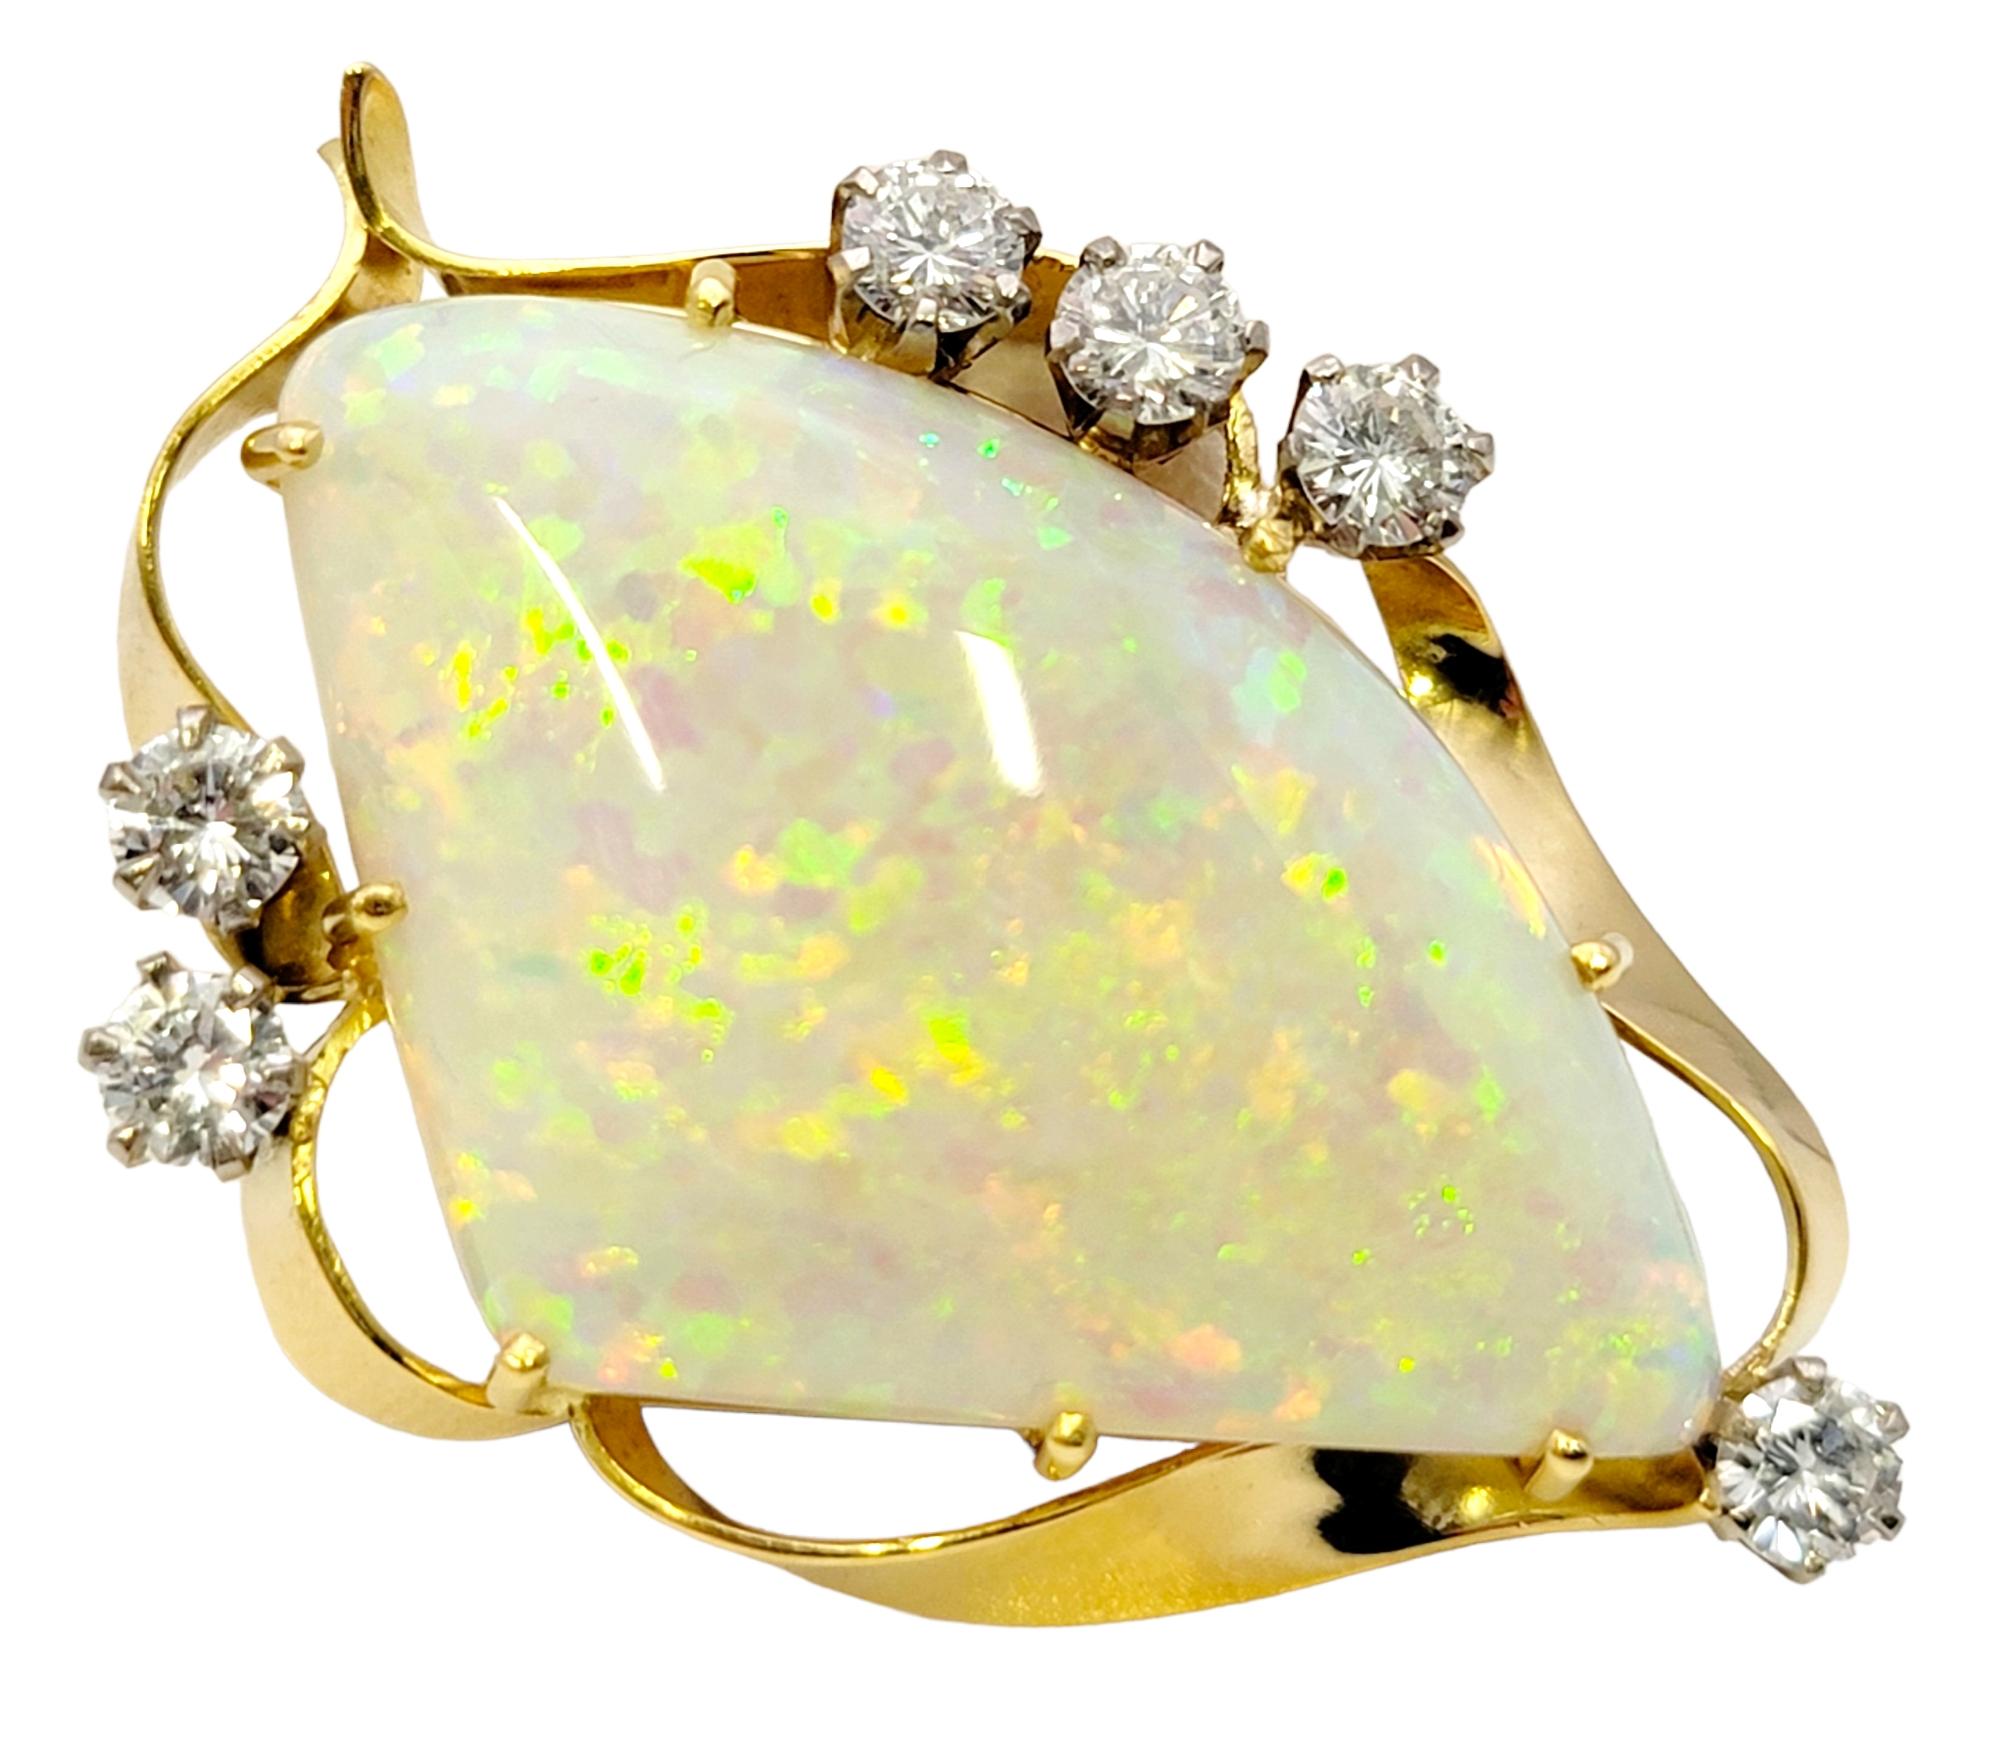 Triangle Cabochon White Opal Brooch / Pendant with Diamonds 18 Karat Yellow Gold In Good Condition For Sale In Scottsdale, AZ